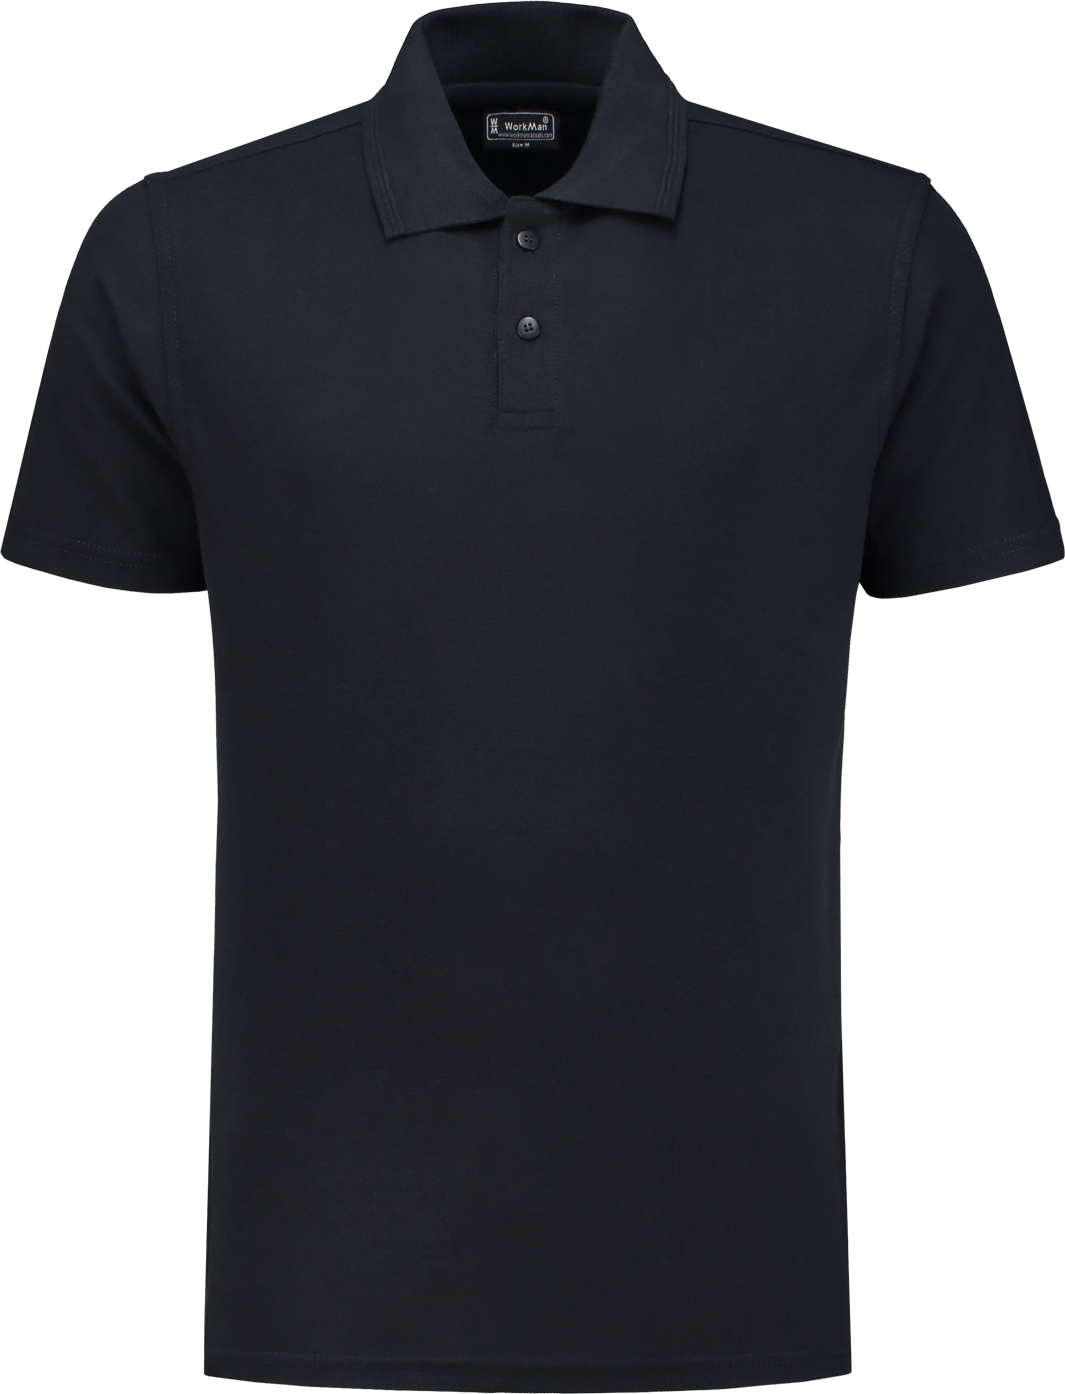 10.6.8102.09 8102 Poloshirt Outfitters Navy 7XL